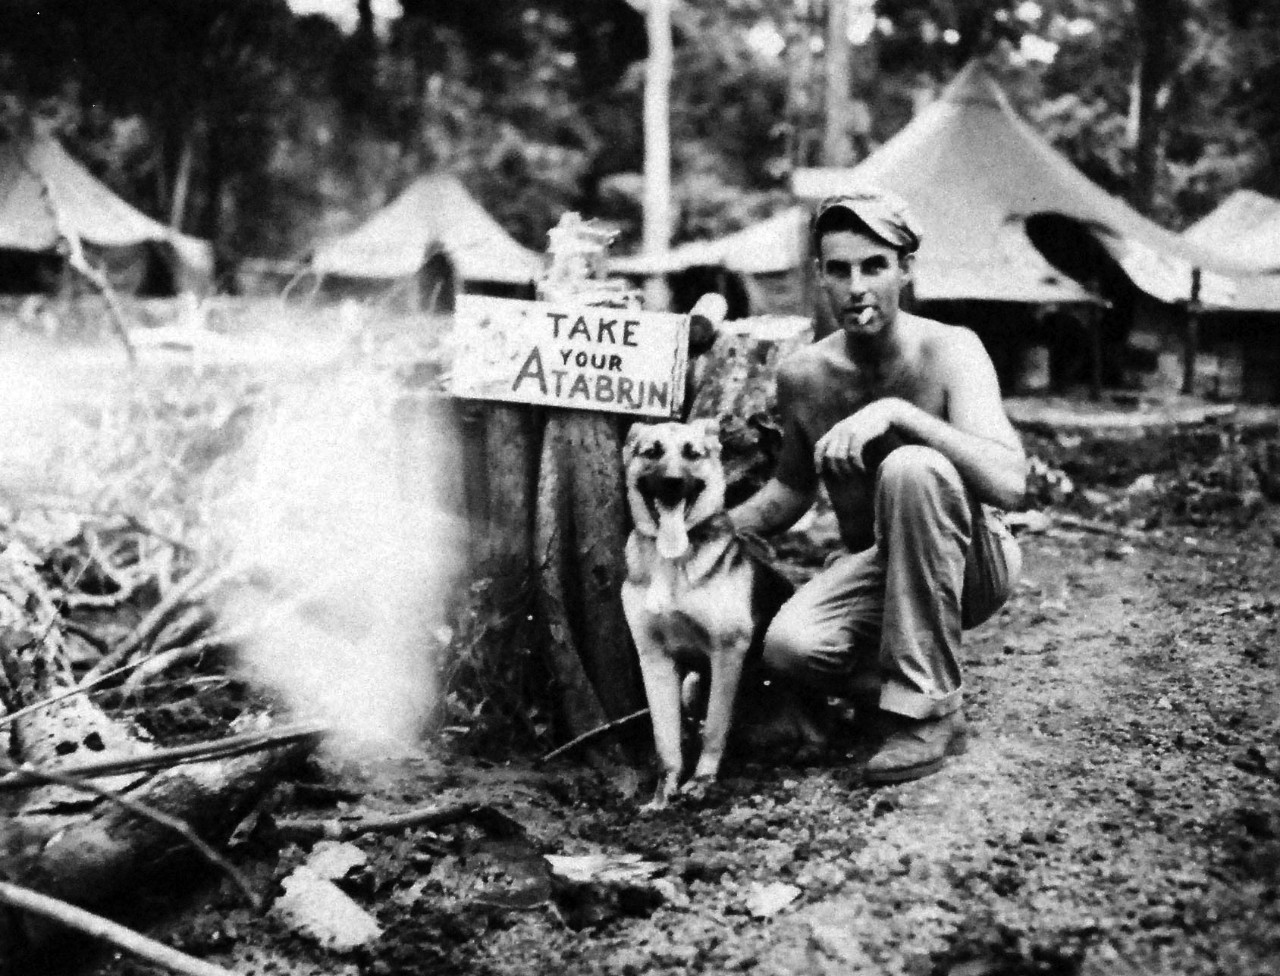 <p>127-GW-966-77356: Battle of Cape Gloucester, New Britain, December 1943-January 1944. “Japanese sentry who joined Marines.” “Nipper,” a Japanese sentry dog, who voluntarily joined the Marines on Cape Glouchester, poses with Marine Master Technical Sergeant George E. Ausman, who had been a Marine since 1926. Photographed by Sergeant G.F. Koepplinger, 10 February 1944.&nbsp;</p>
